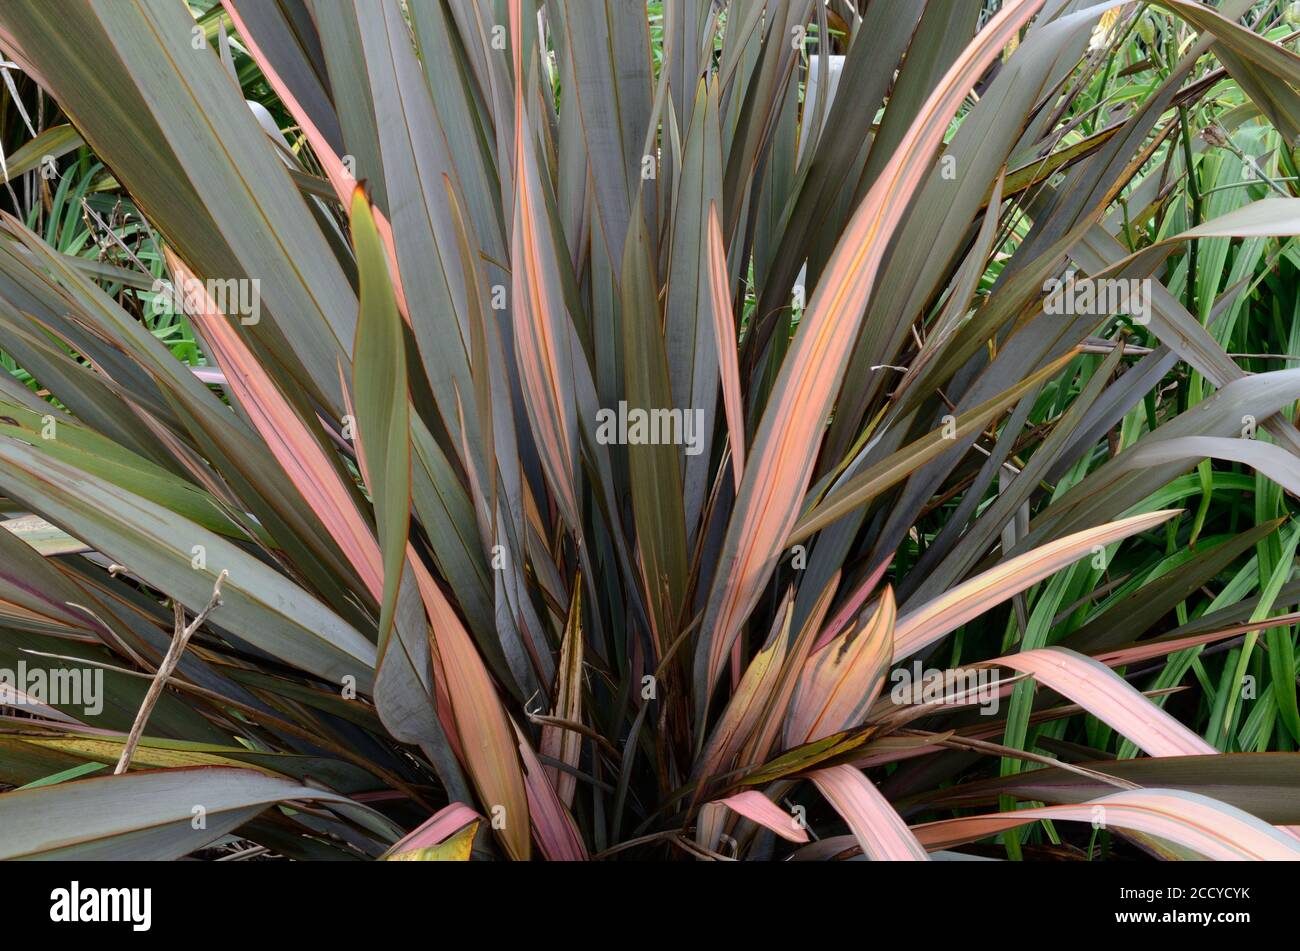 Phormiium jester Flax lily evergreen perennial with long linear pink and green leaves Stock Photo